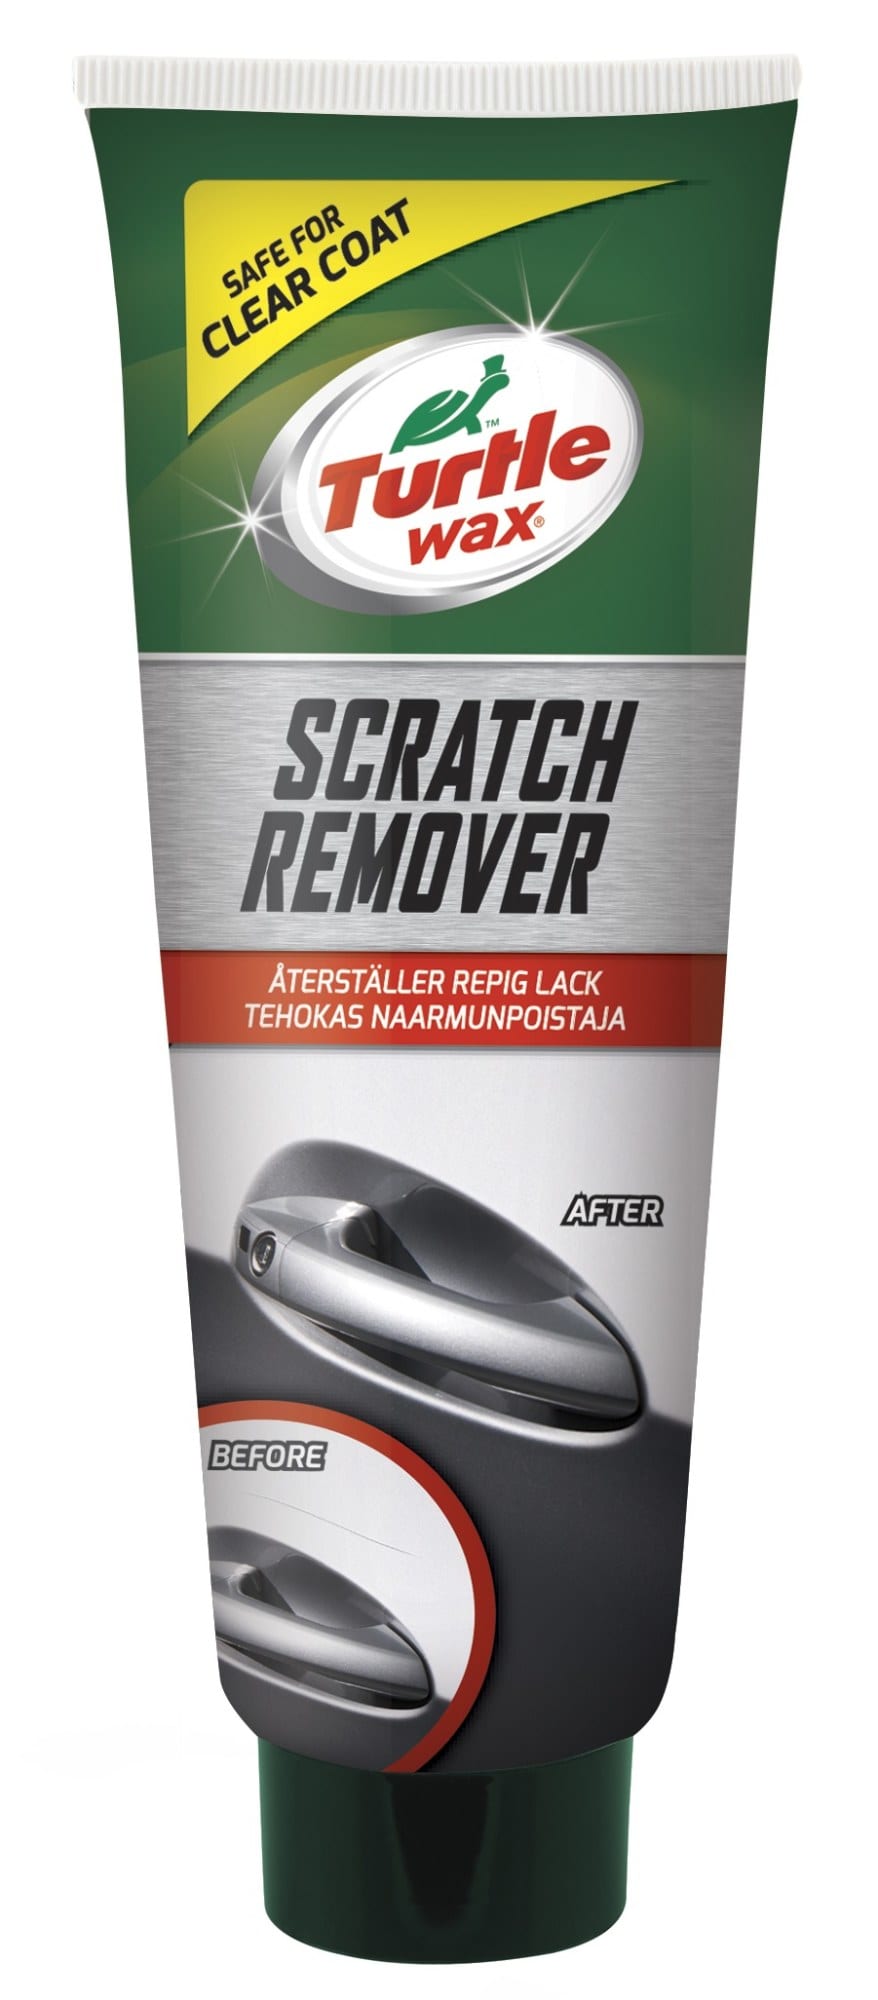 Turtle Wax Scratch Remover Review